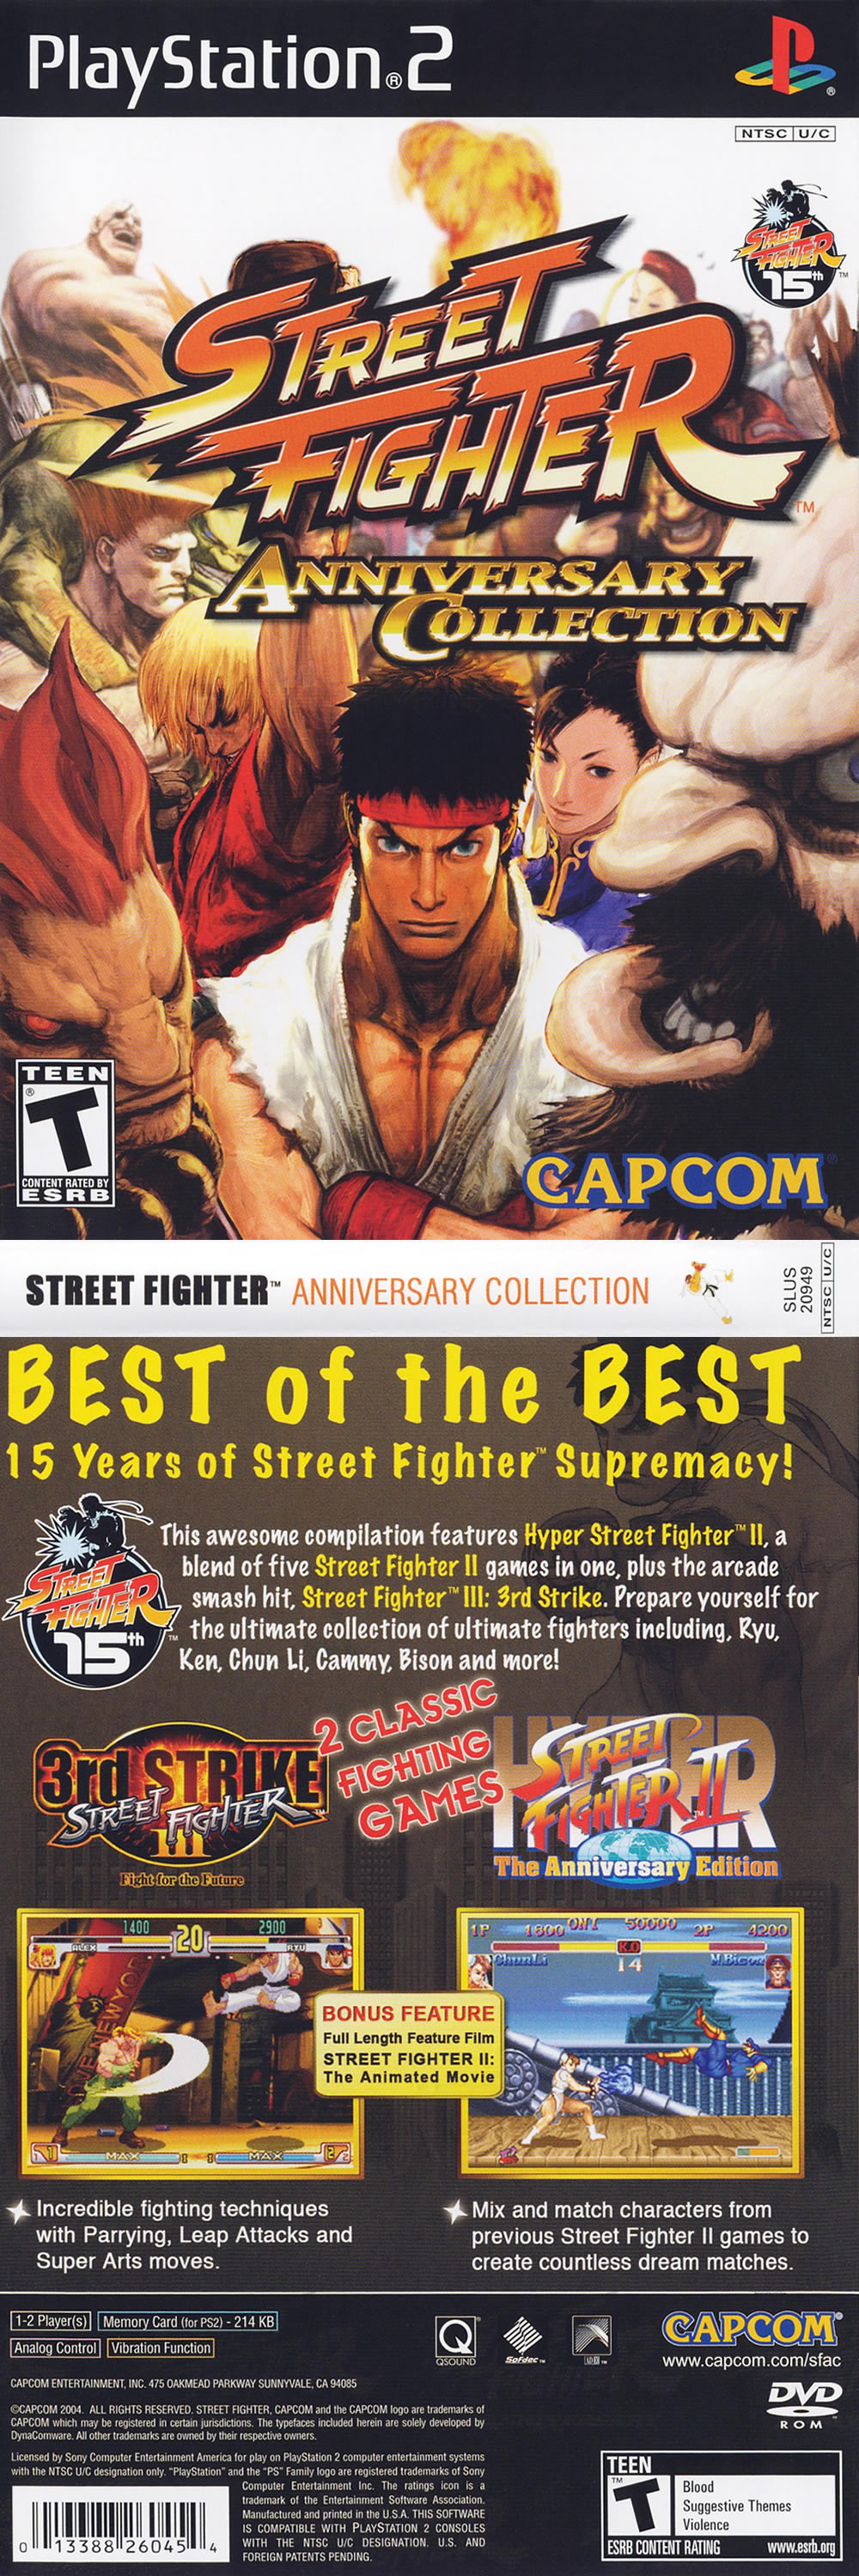 Hyper Street Fighter 2: The Anniversary Edition - Arcade - Commands/Moves 